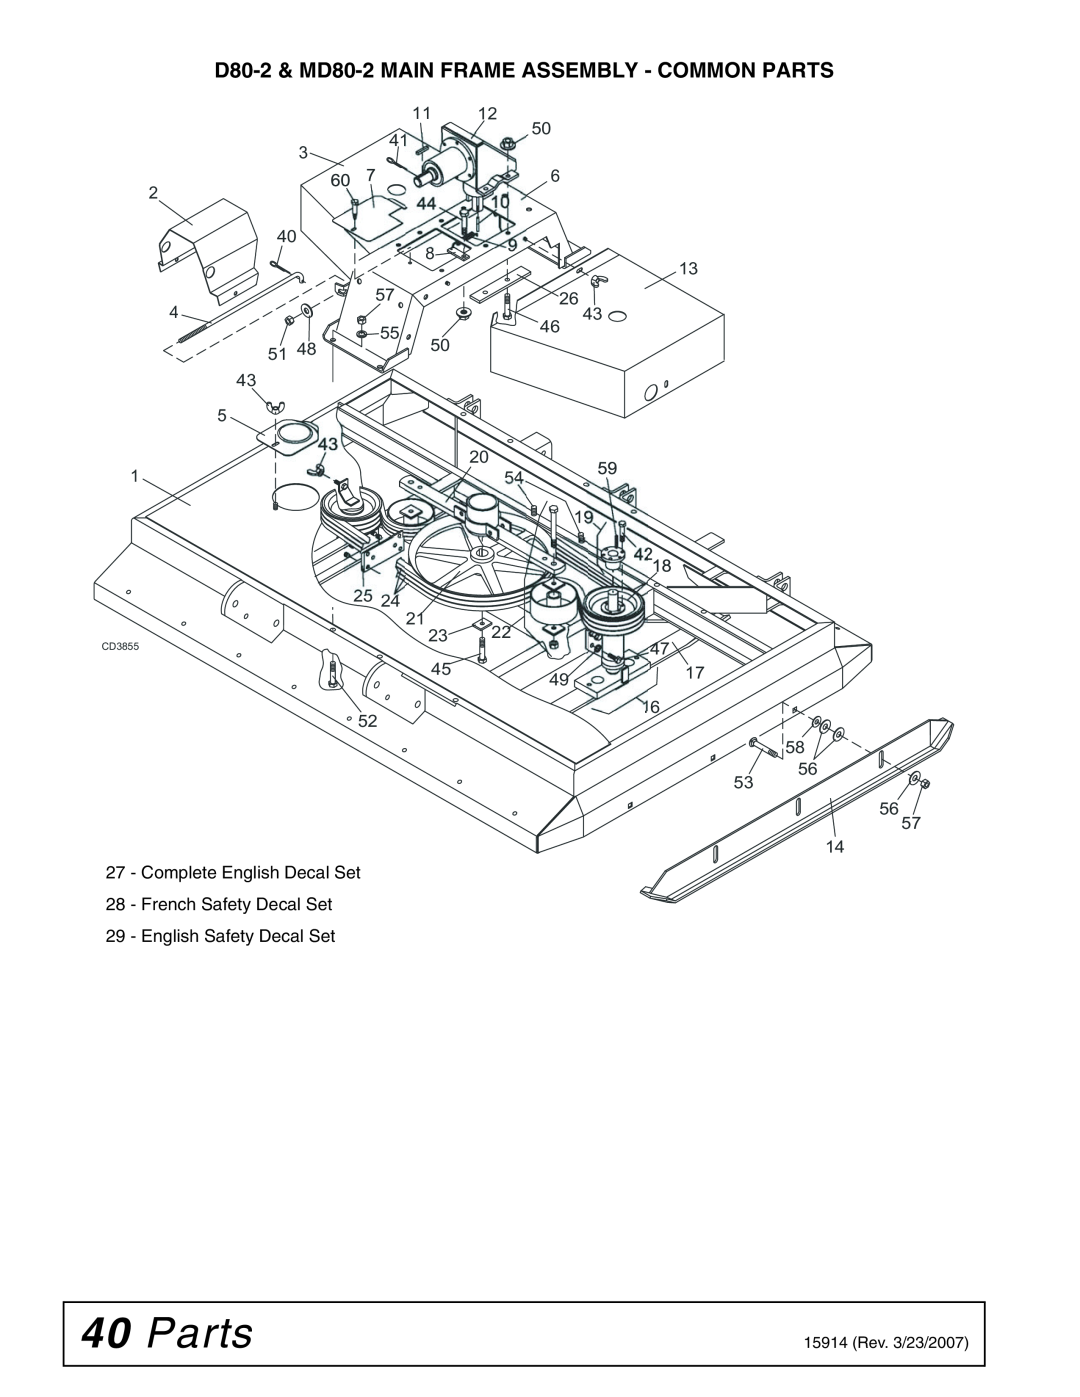 Woods Equipment manual Parts, D80-2& MD80-2MAIN FRAME ASSEMBLY - COMMON PARTS 